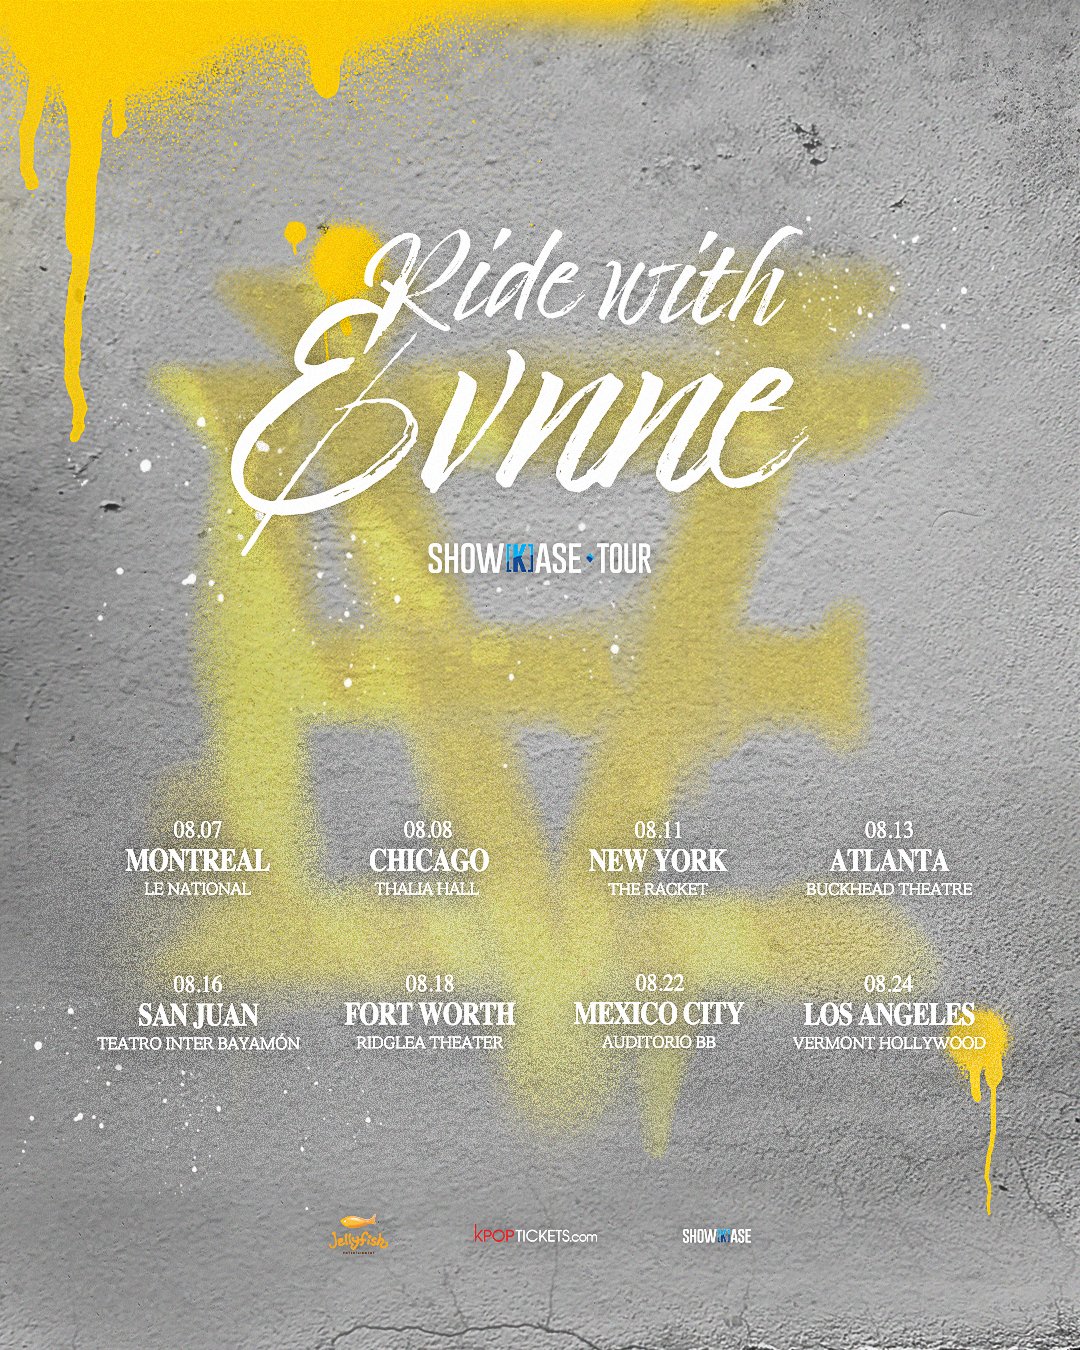 EVNNE Announces Dates And Cities For 1st North American Tour 